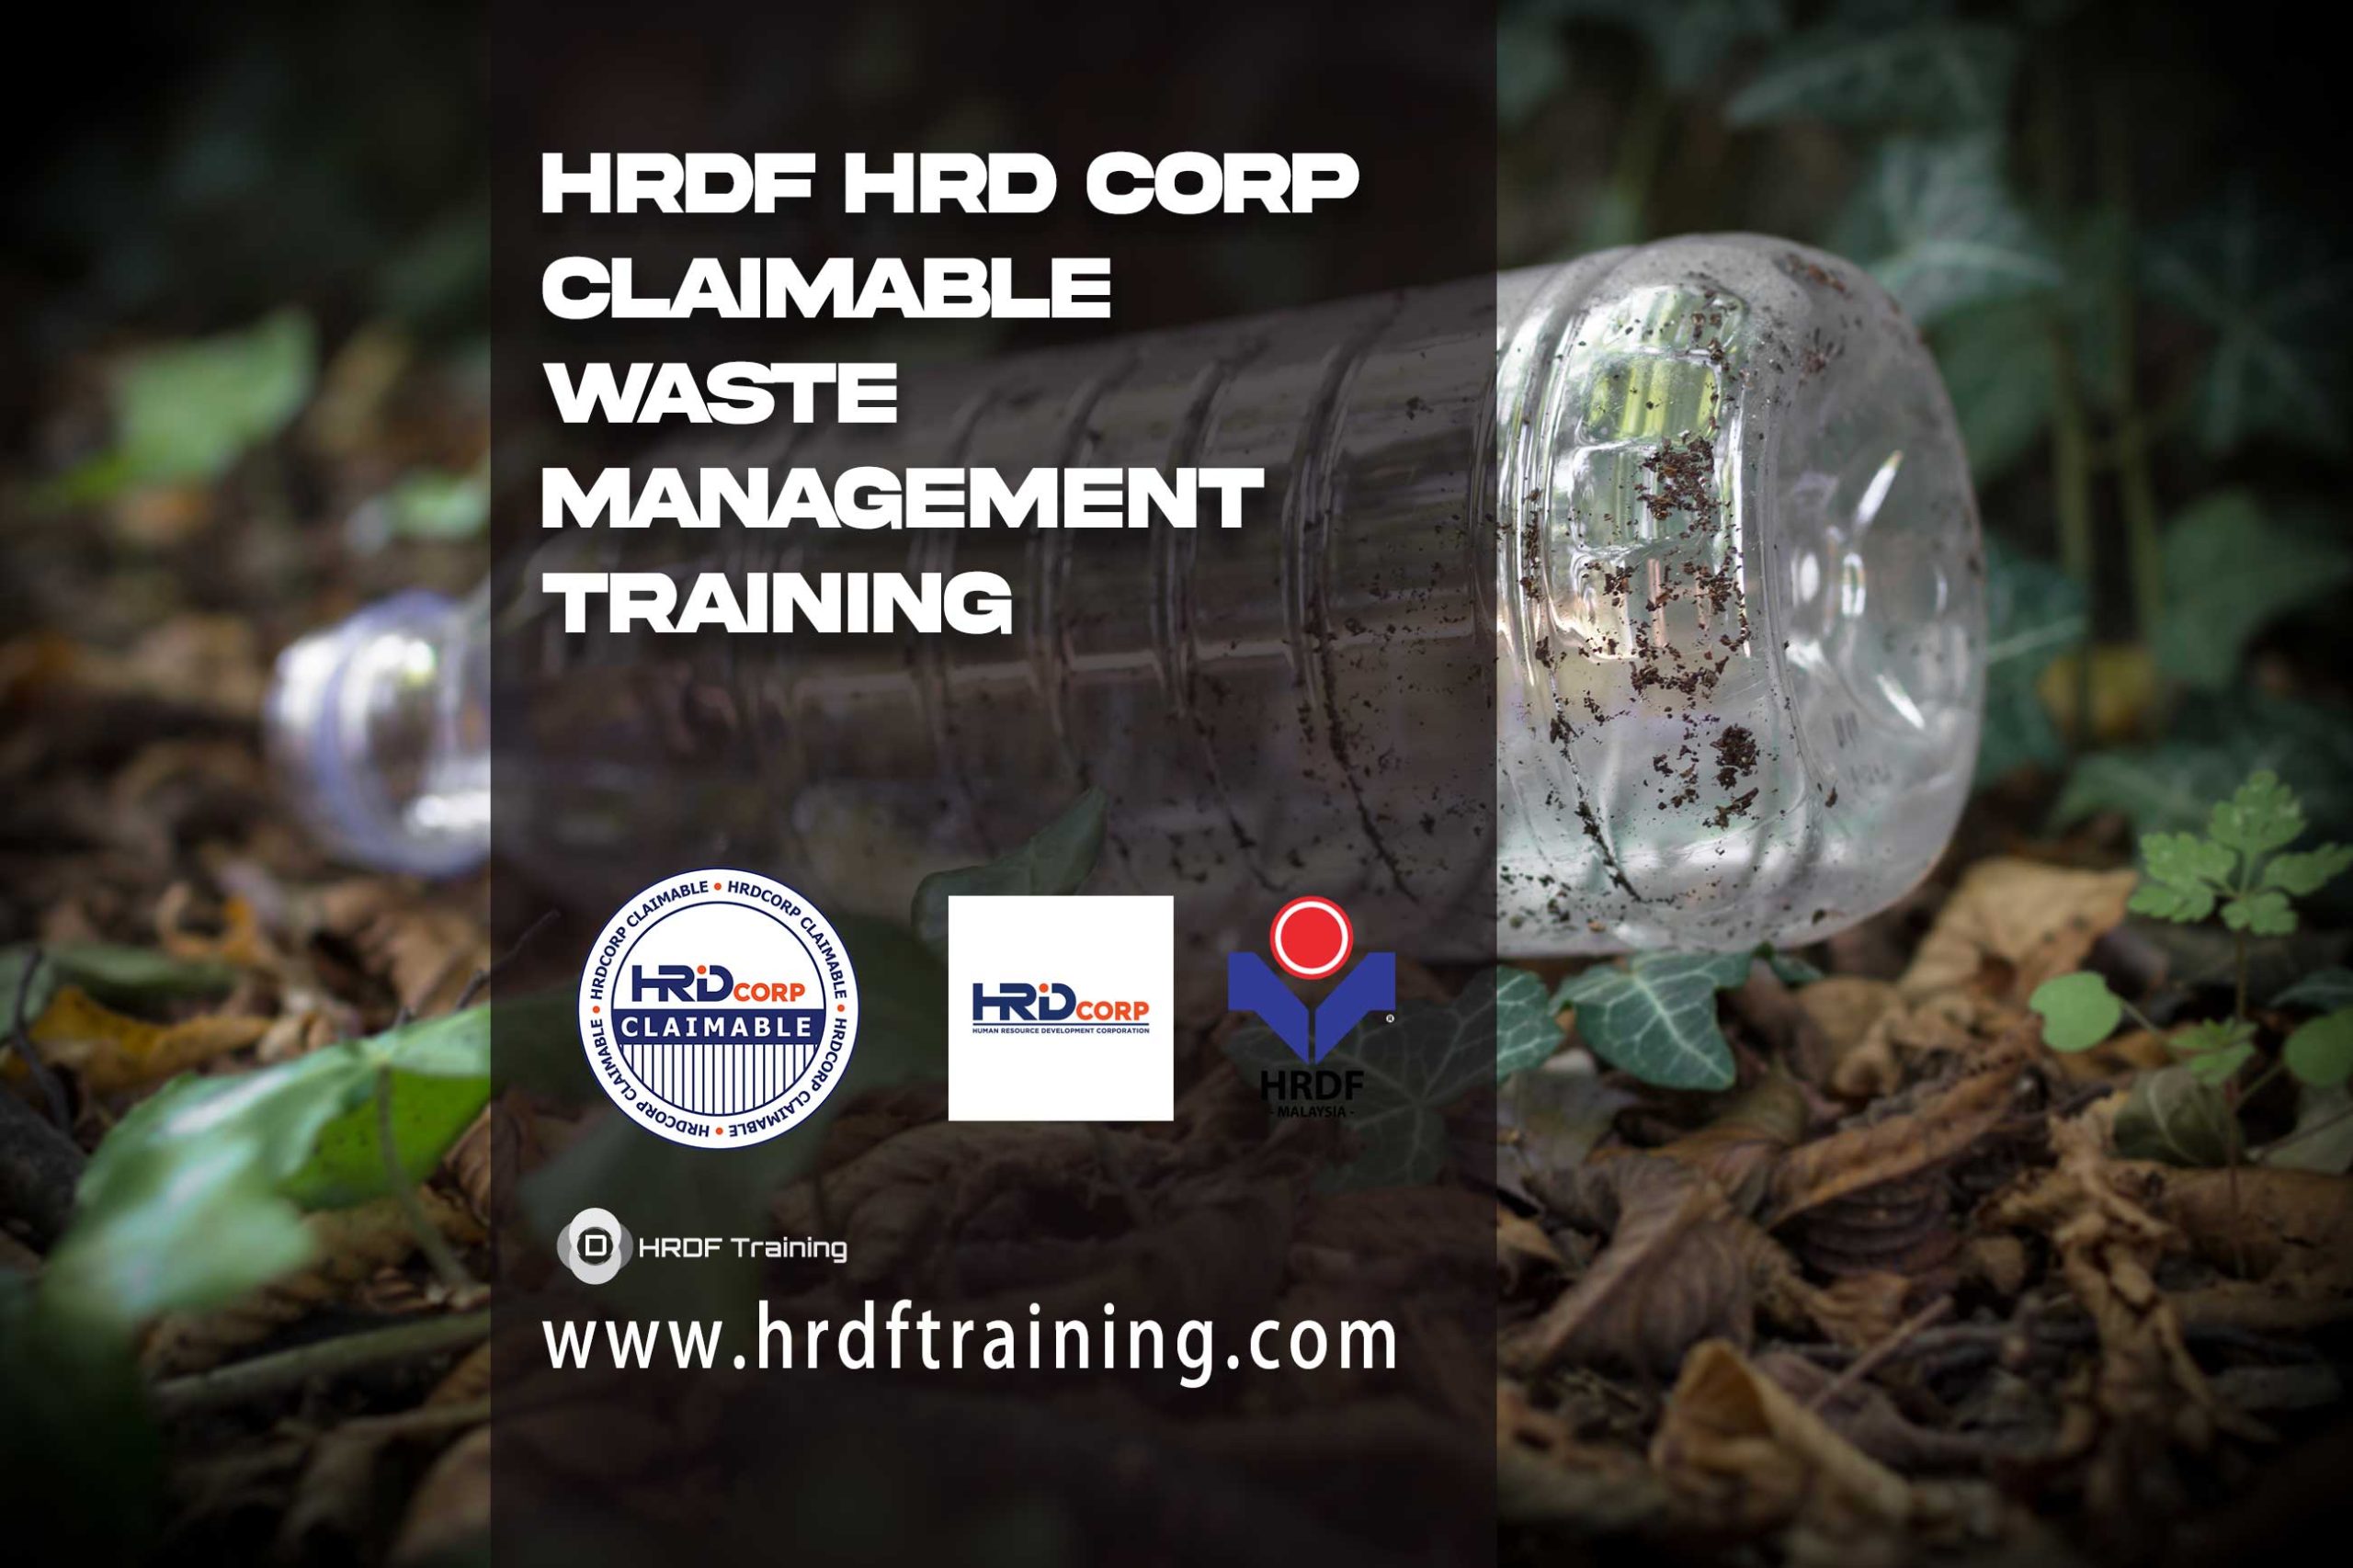 HRDF-HRD-Corp-Claimable-Waste-Management-Training